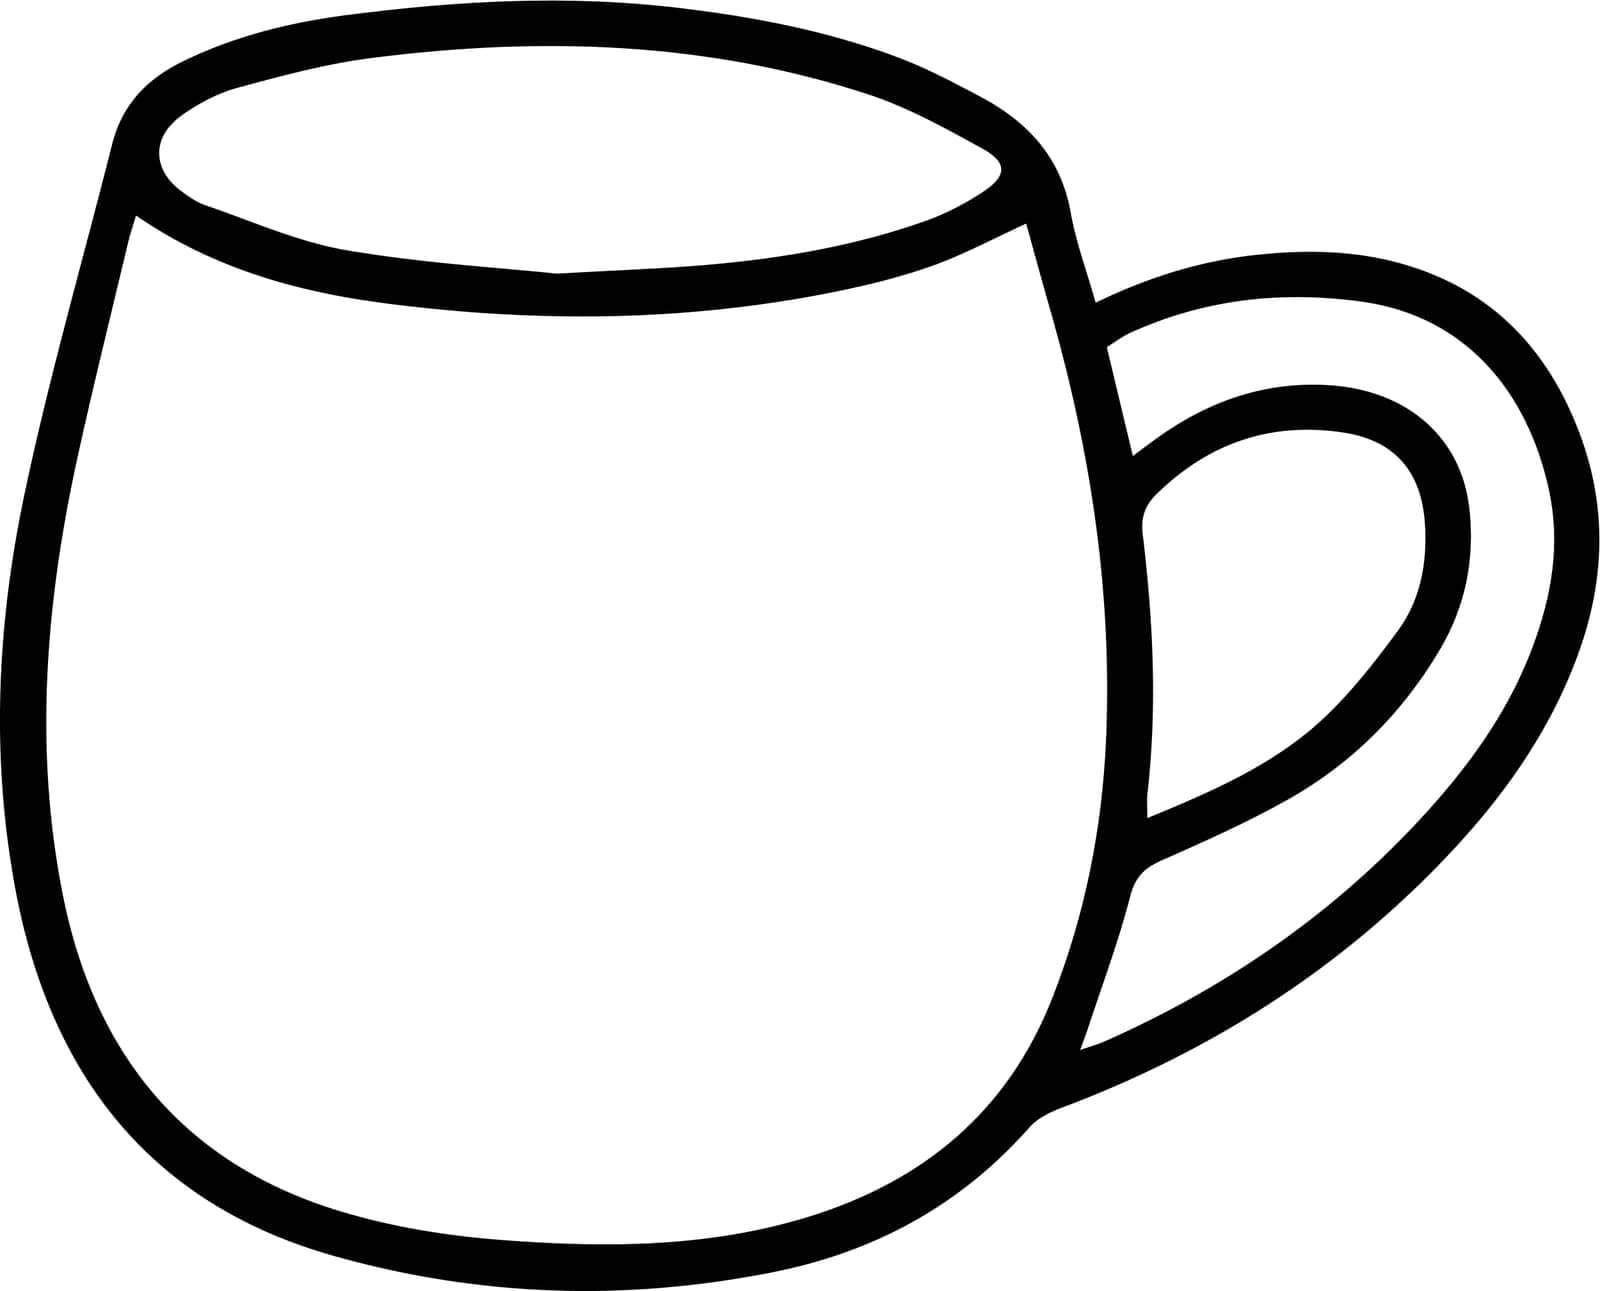 Mug isolated on a white background. Doodle by Dustick